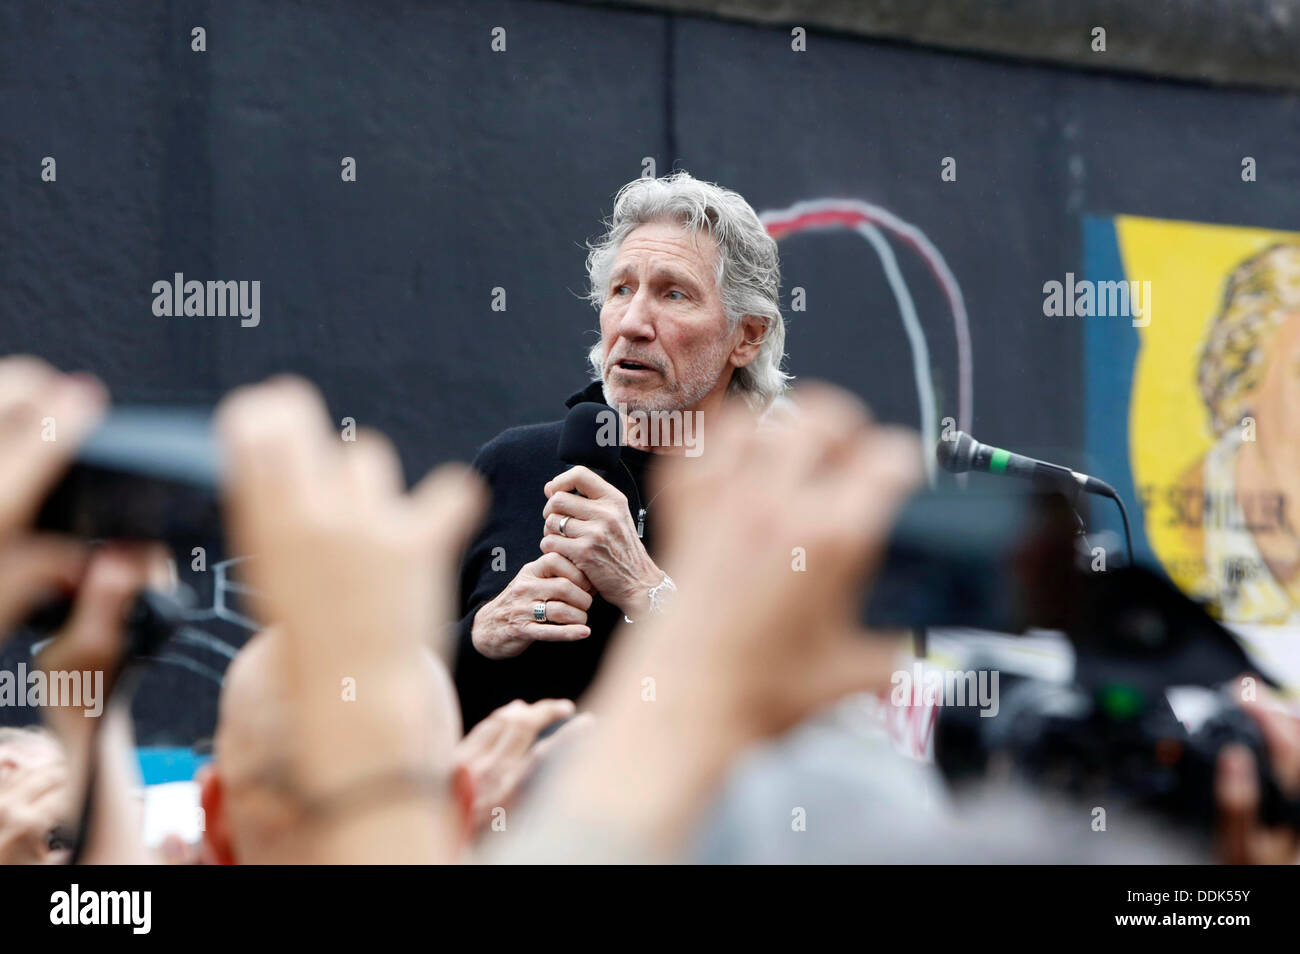 Berlin, Germany. 3rd Sept, 2013. Roger Waters supports the East Side Gallery protest. On 21 July 1990 on the occasion of the fall of the Berlin Wall, Waters organized a spectacular live concert performance of 'The Wall' at Potsdamer Platz in Berlin with many internationally known artists. At the same time, the American artist Lance Keller painted the cover image 'The Wal'l at the spot where the concert was held on the Berlin Wall, which later became the 'East Side Gallery'. © dpa picture alliance/Alamy Live News Stock Photo